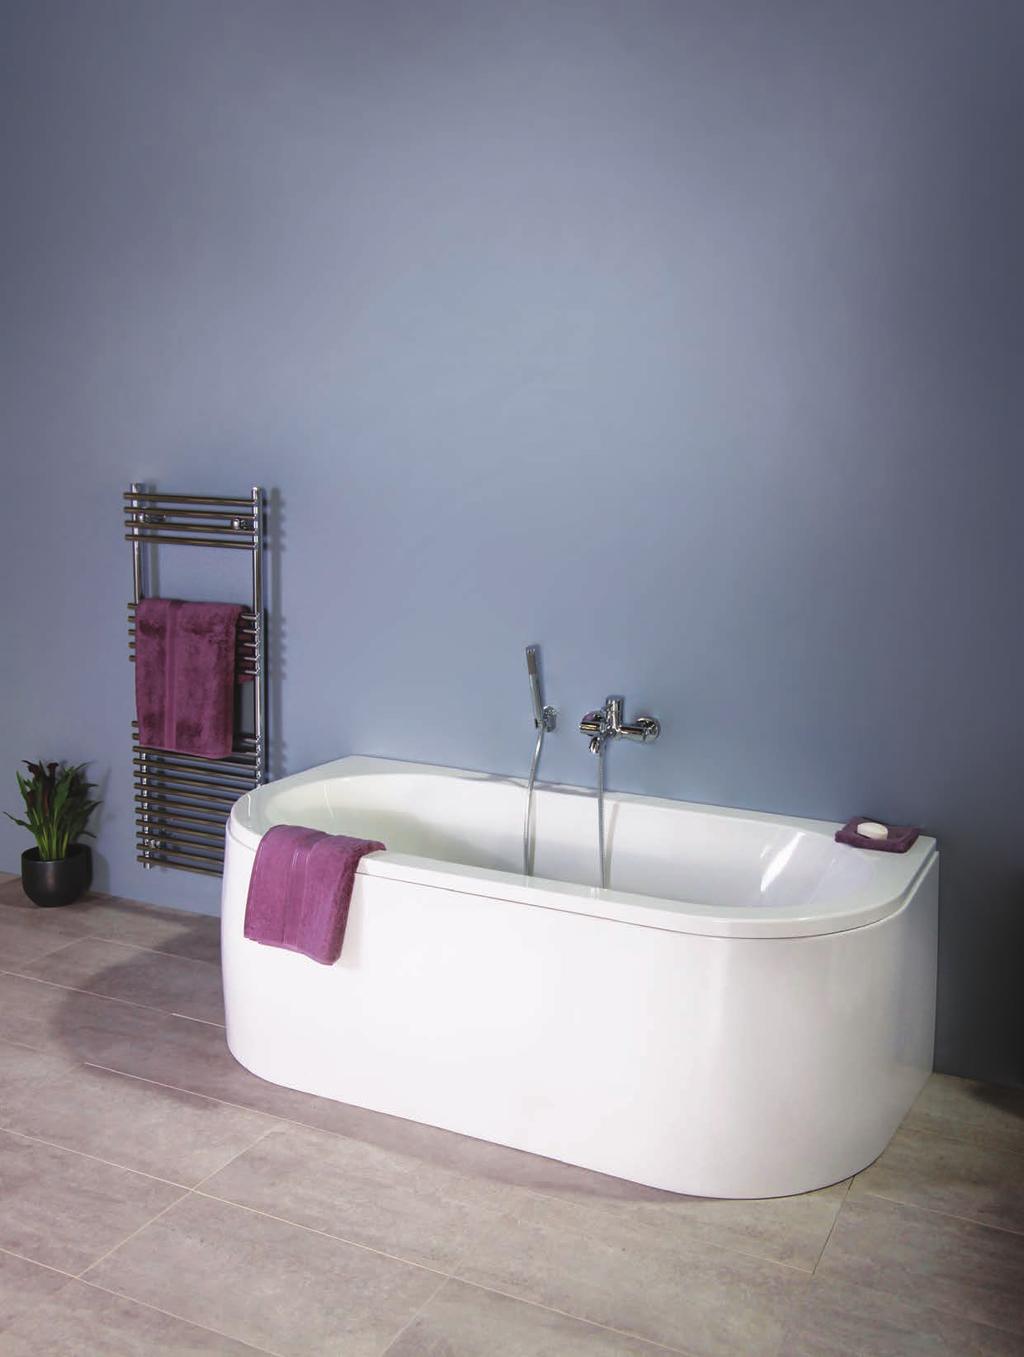 BATHS - Beta Cast Developed with quality and individuality in mind Beta Cast is a process of super-reinforcement which creates a rigid, super strong acrylic bath.